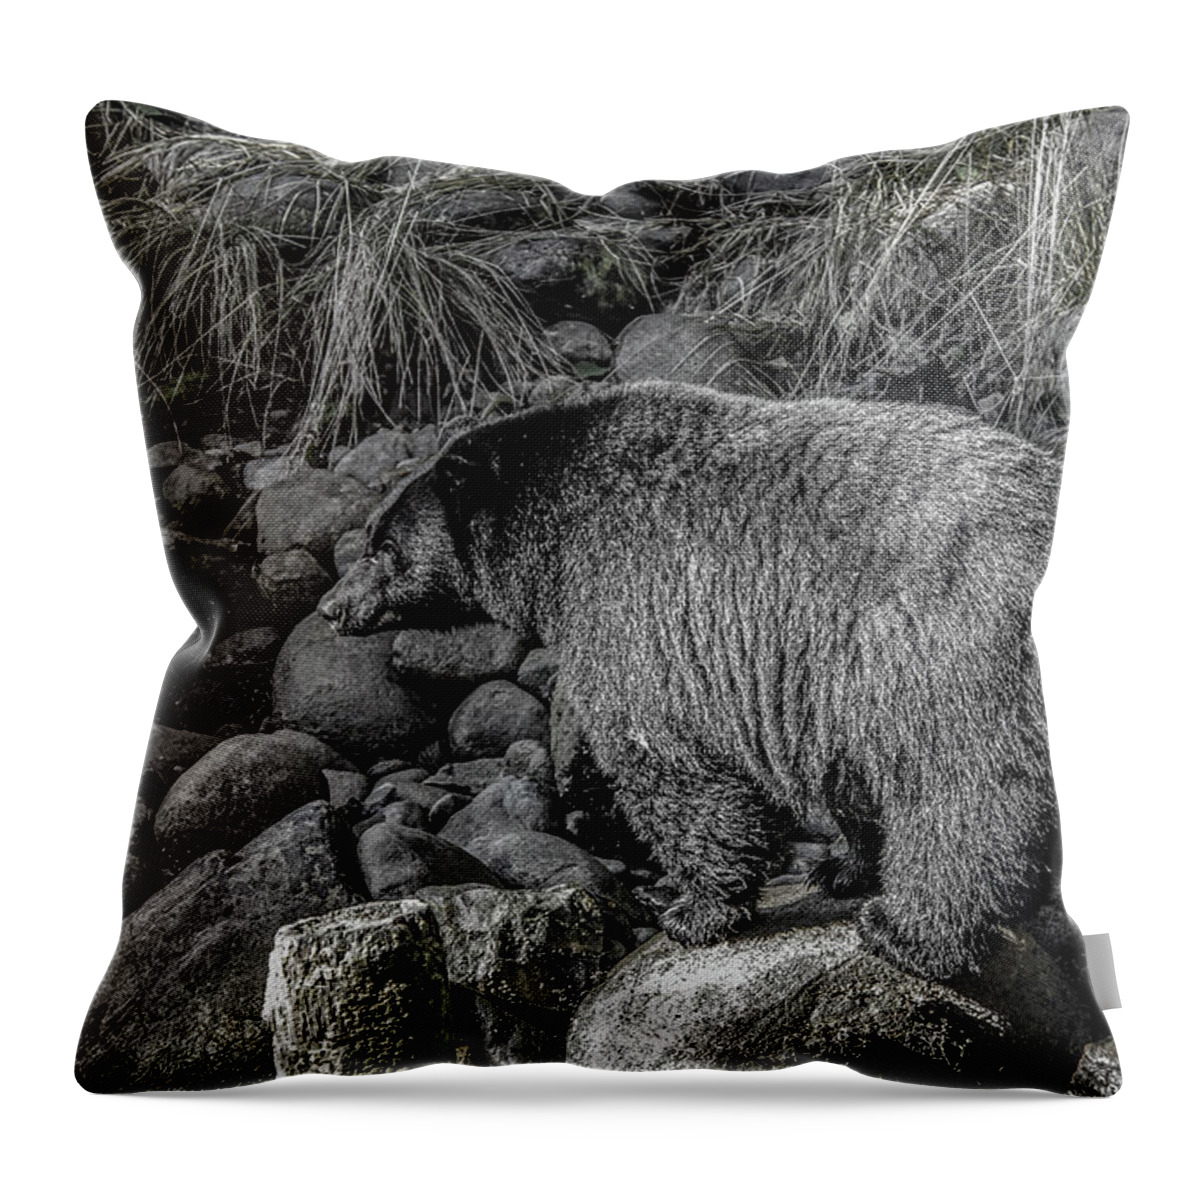 Black Bear Throw Pillow featuring the photograph Watching Black Bear by Roxy Hurtubise